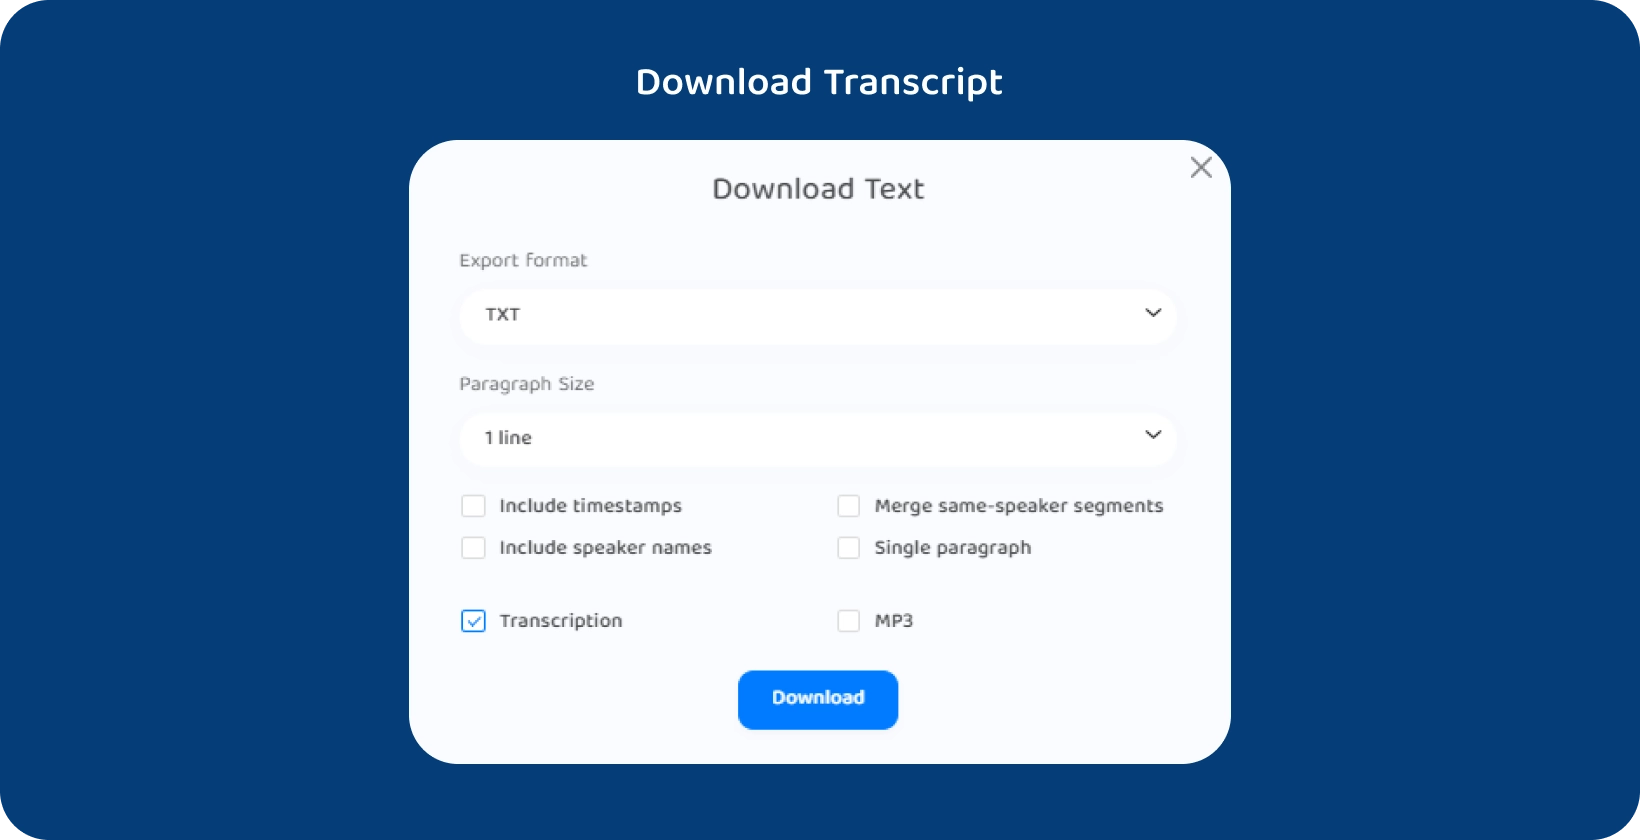 Transkriptor interface showing options for downloading the text of a transcribed lecture.